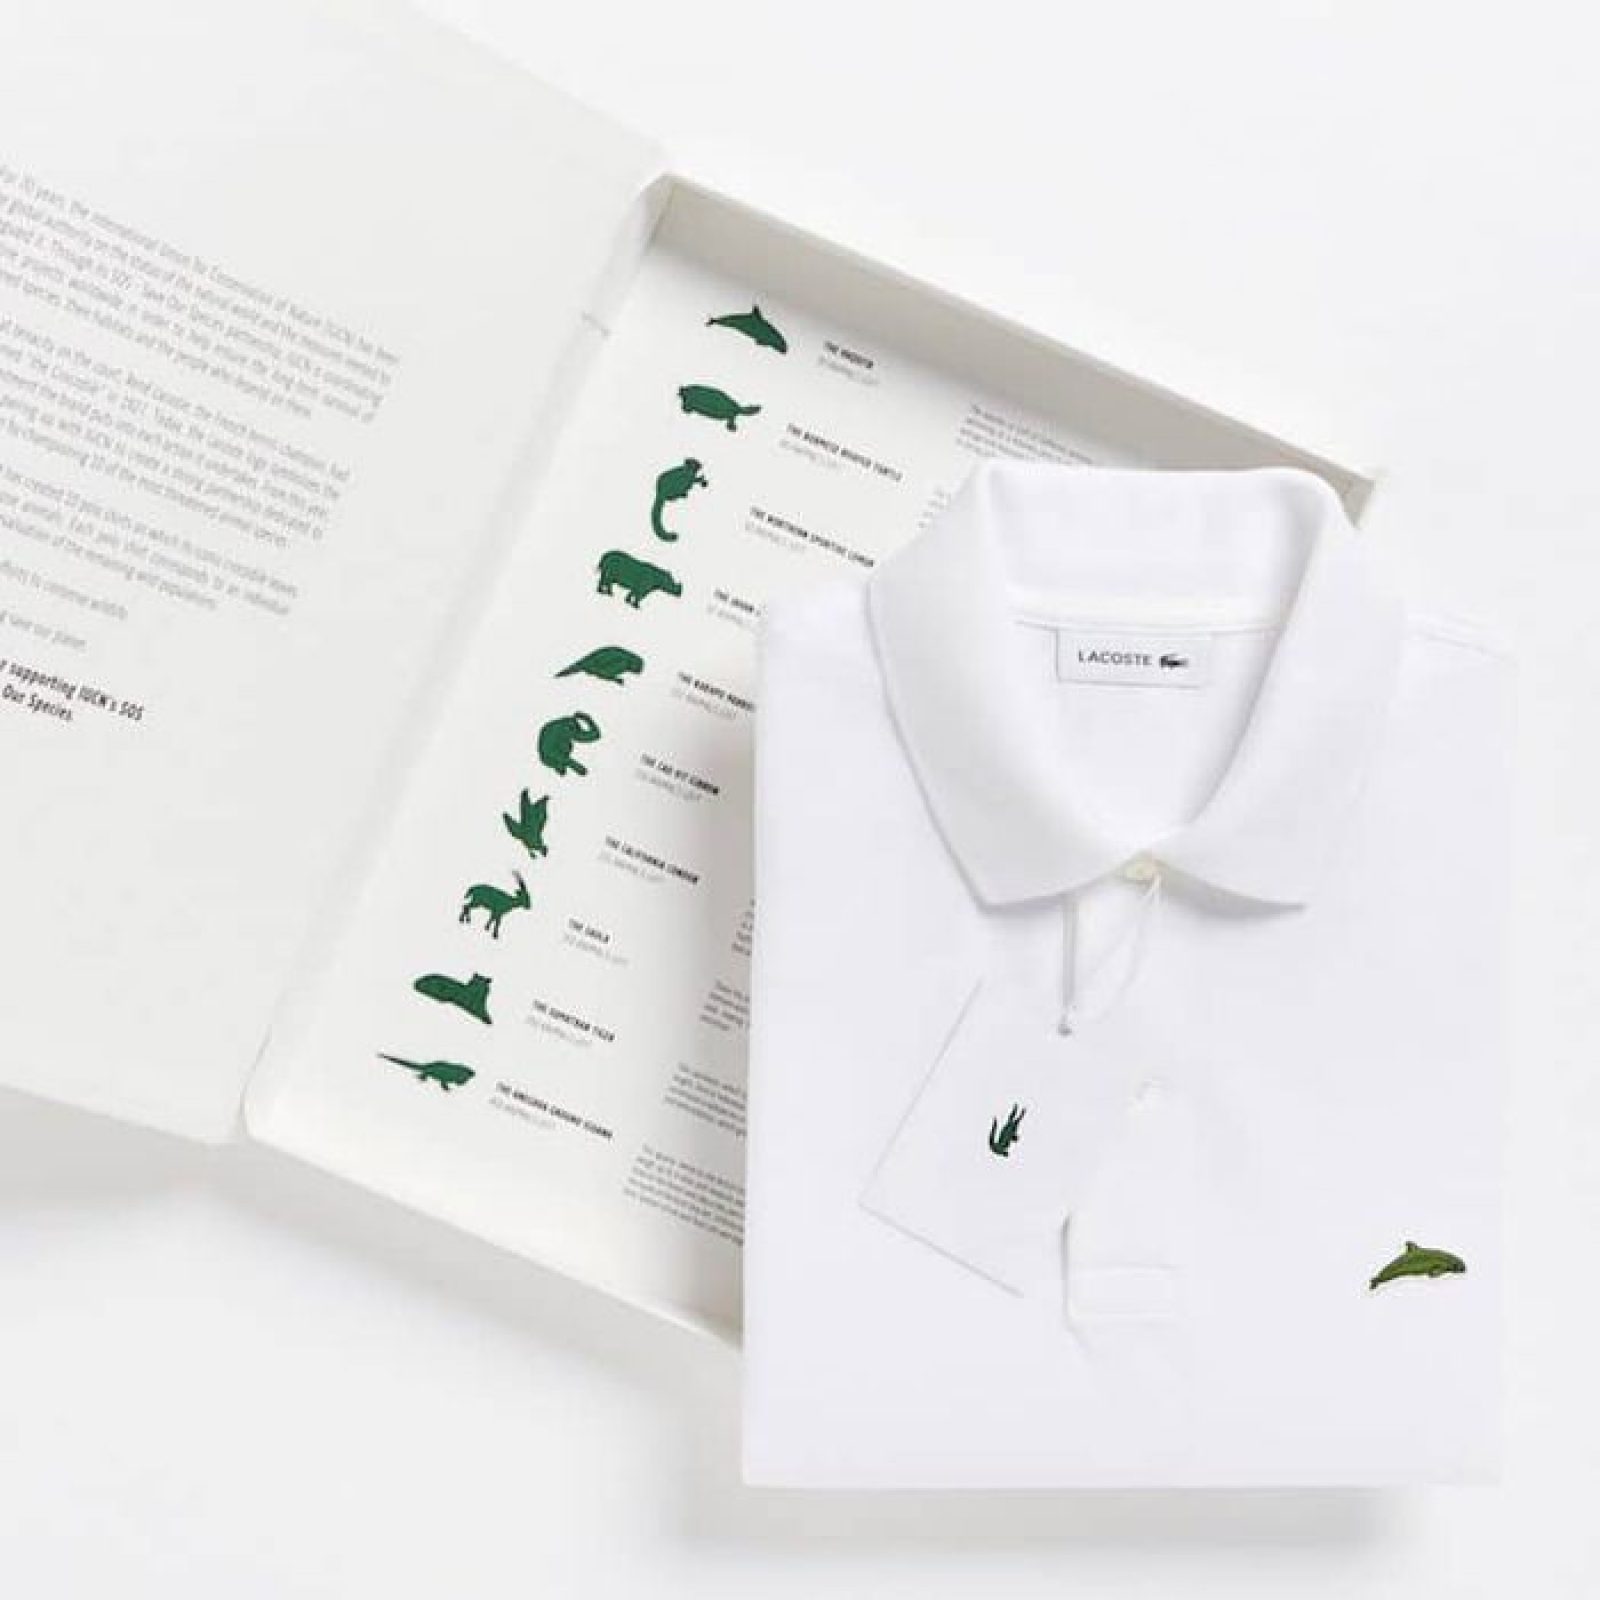 lacoste limited edition extinct animals